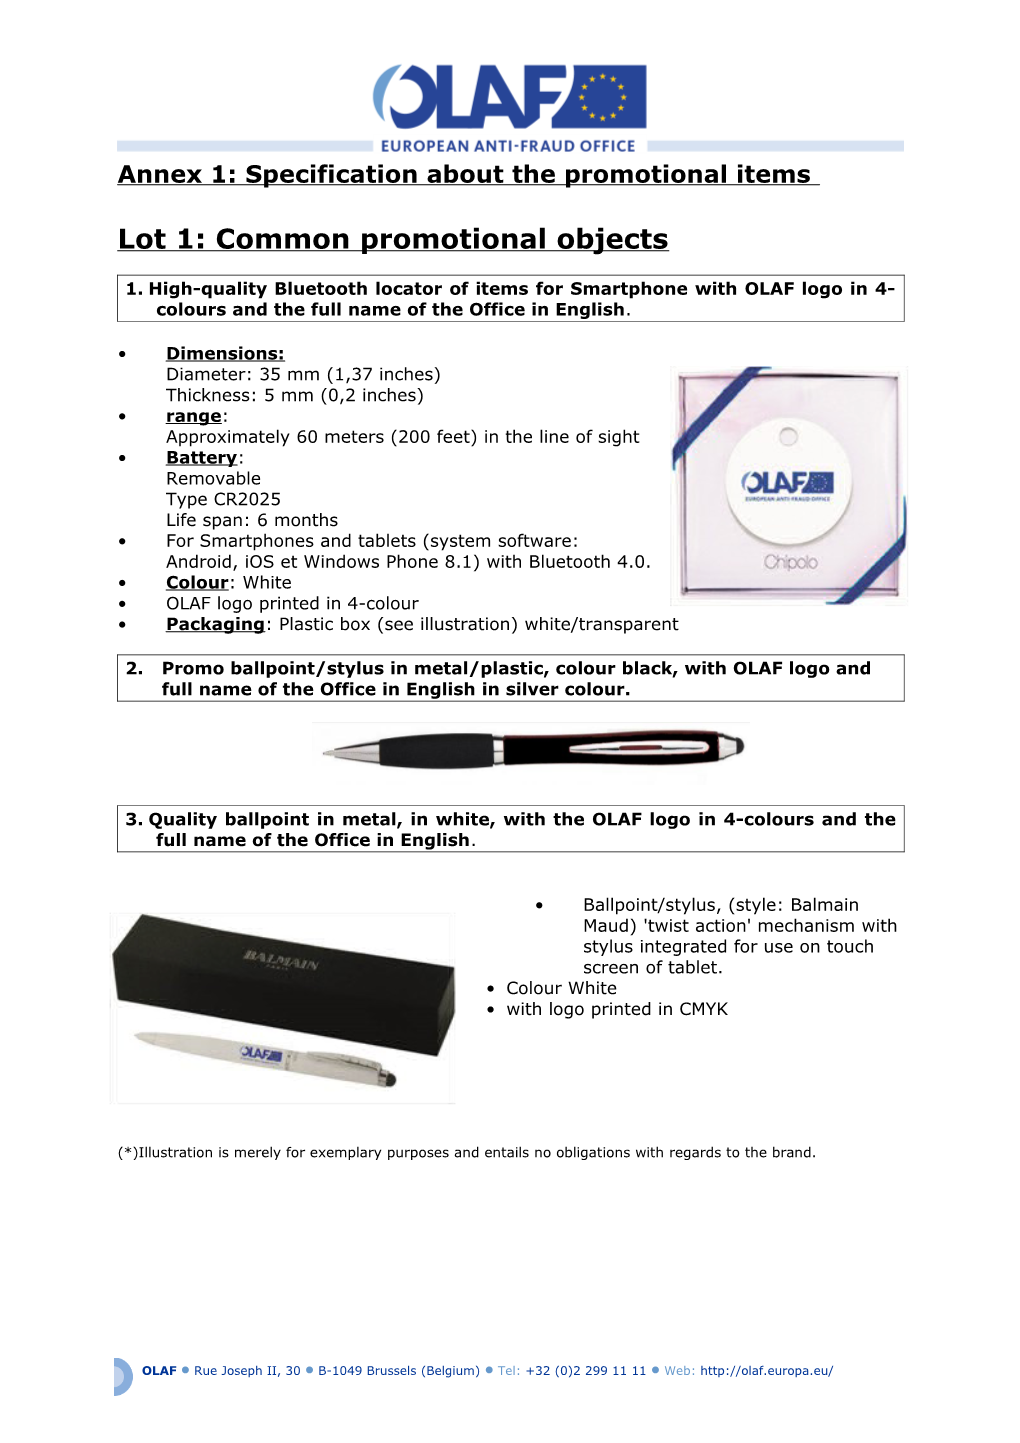 Annex 1: Specification About the Promotional Items